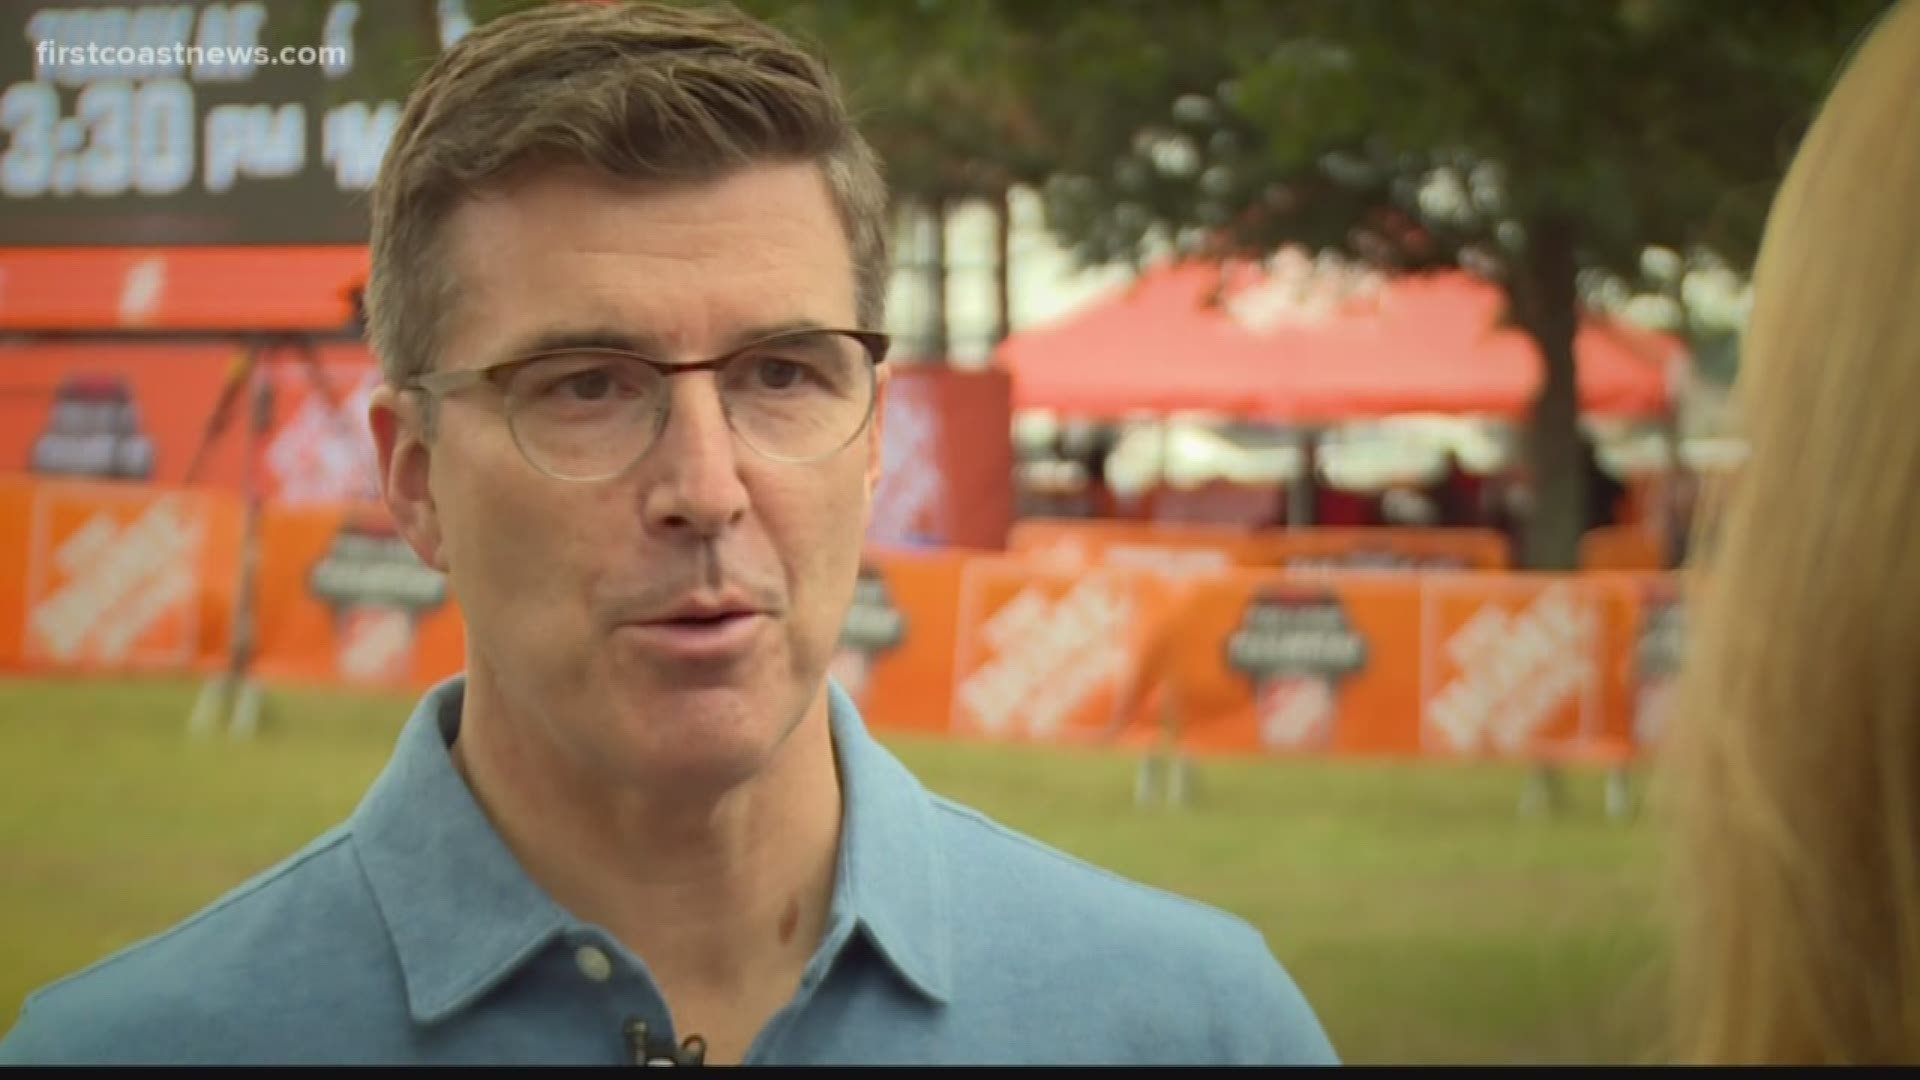 ESPN's College GameDay along with SEC Nation will be broadcasting live from Downtown Jax Saturday morning. Rece Davis tells us who he thinks is going to win...